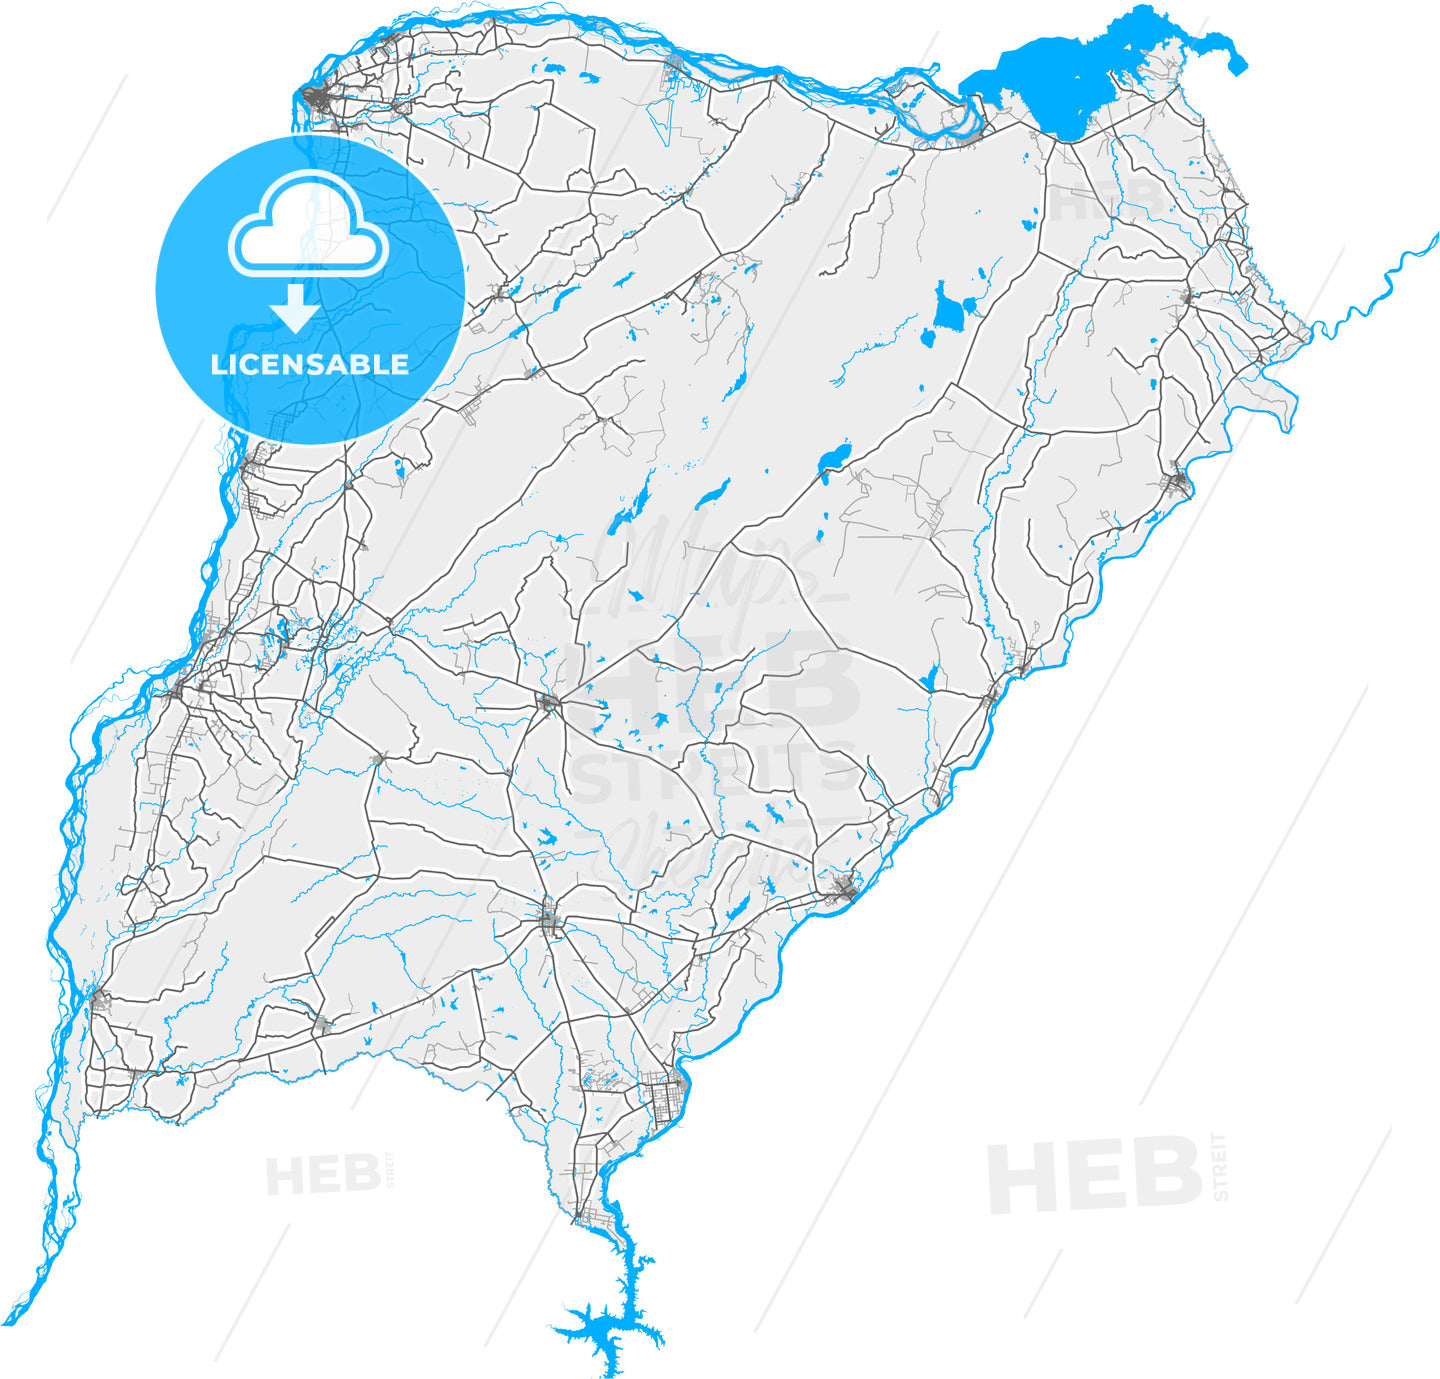 Corrientes, Argentina, high quality vector map